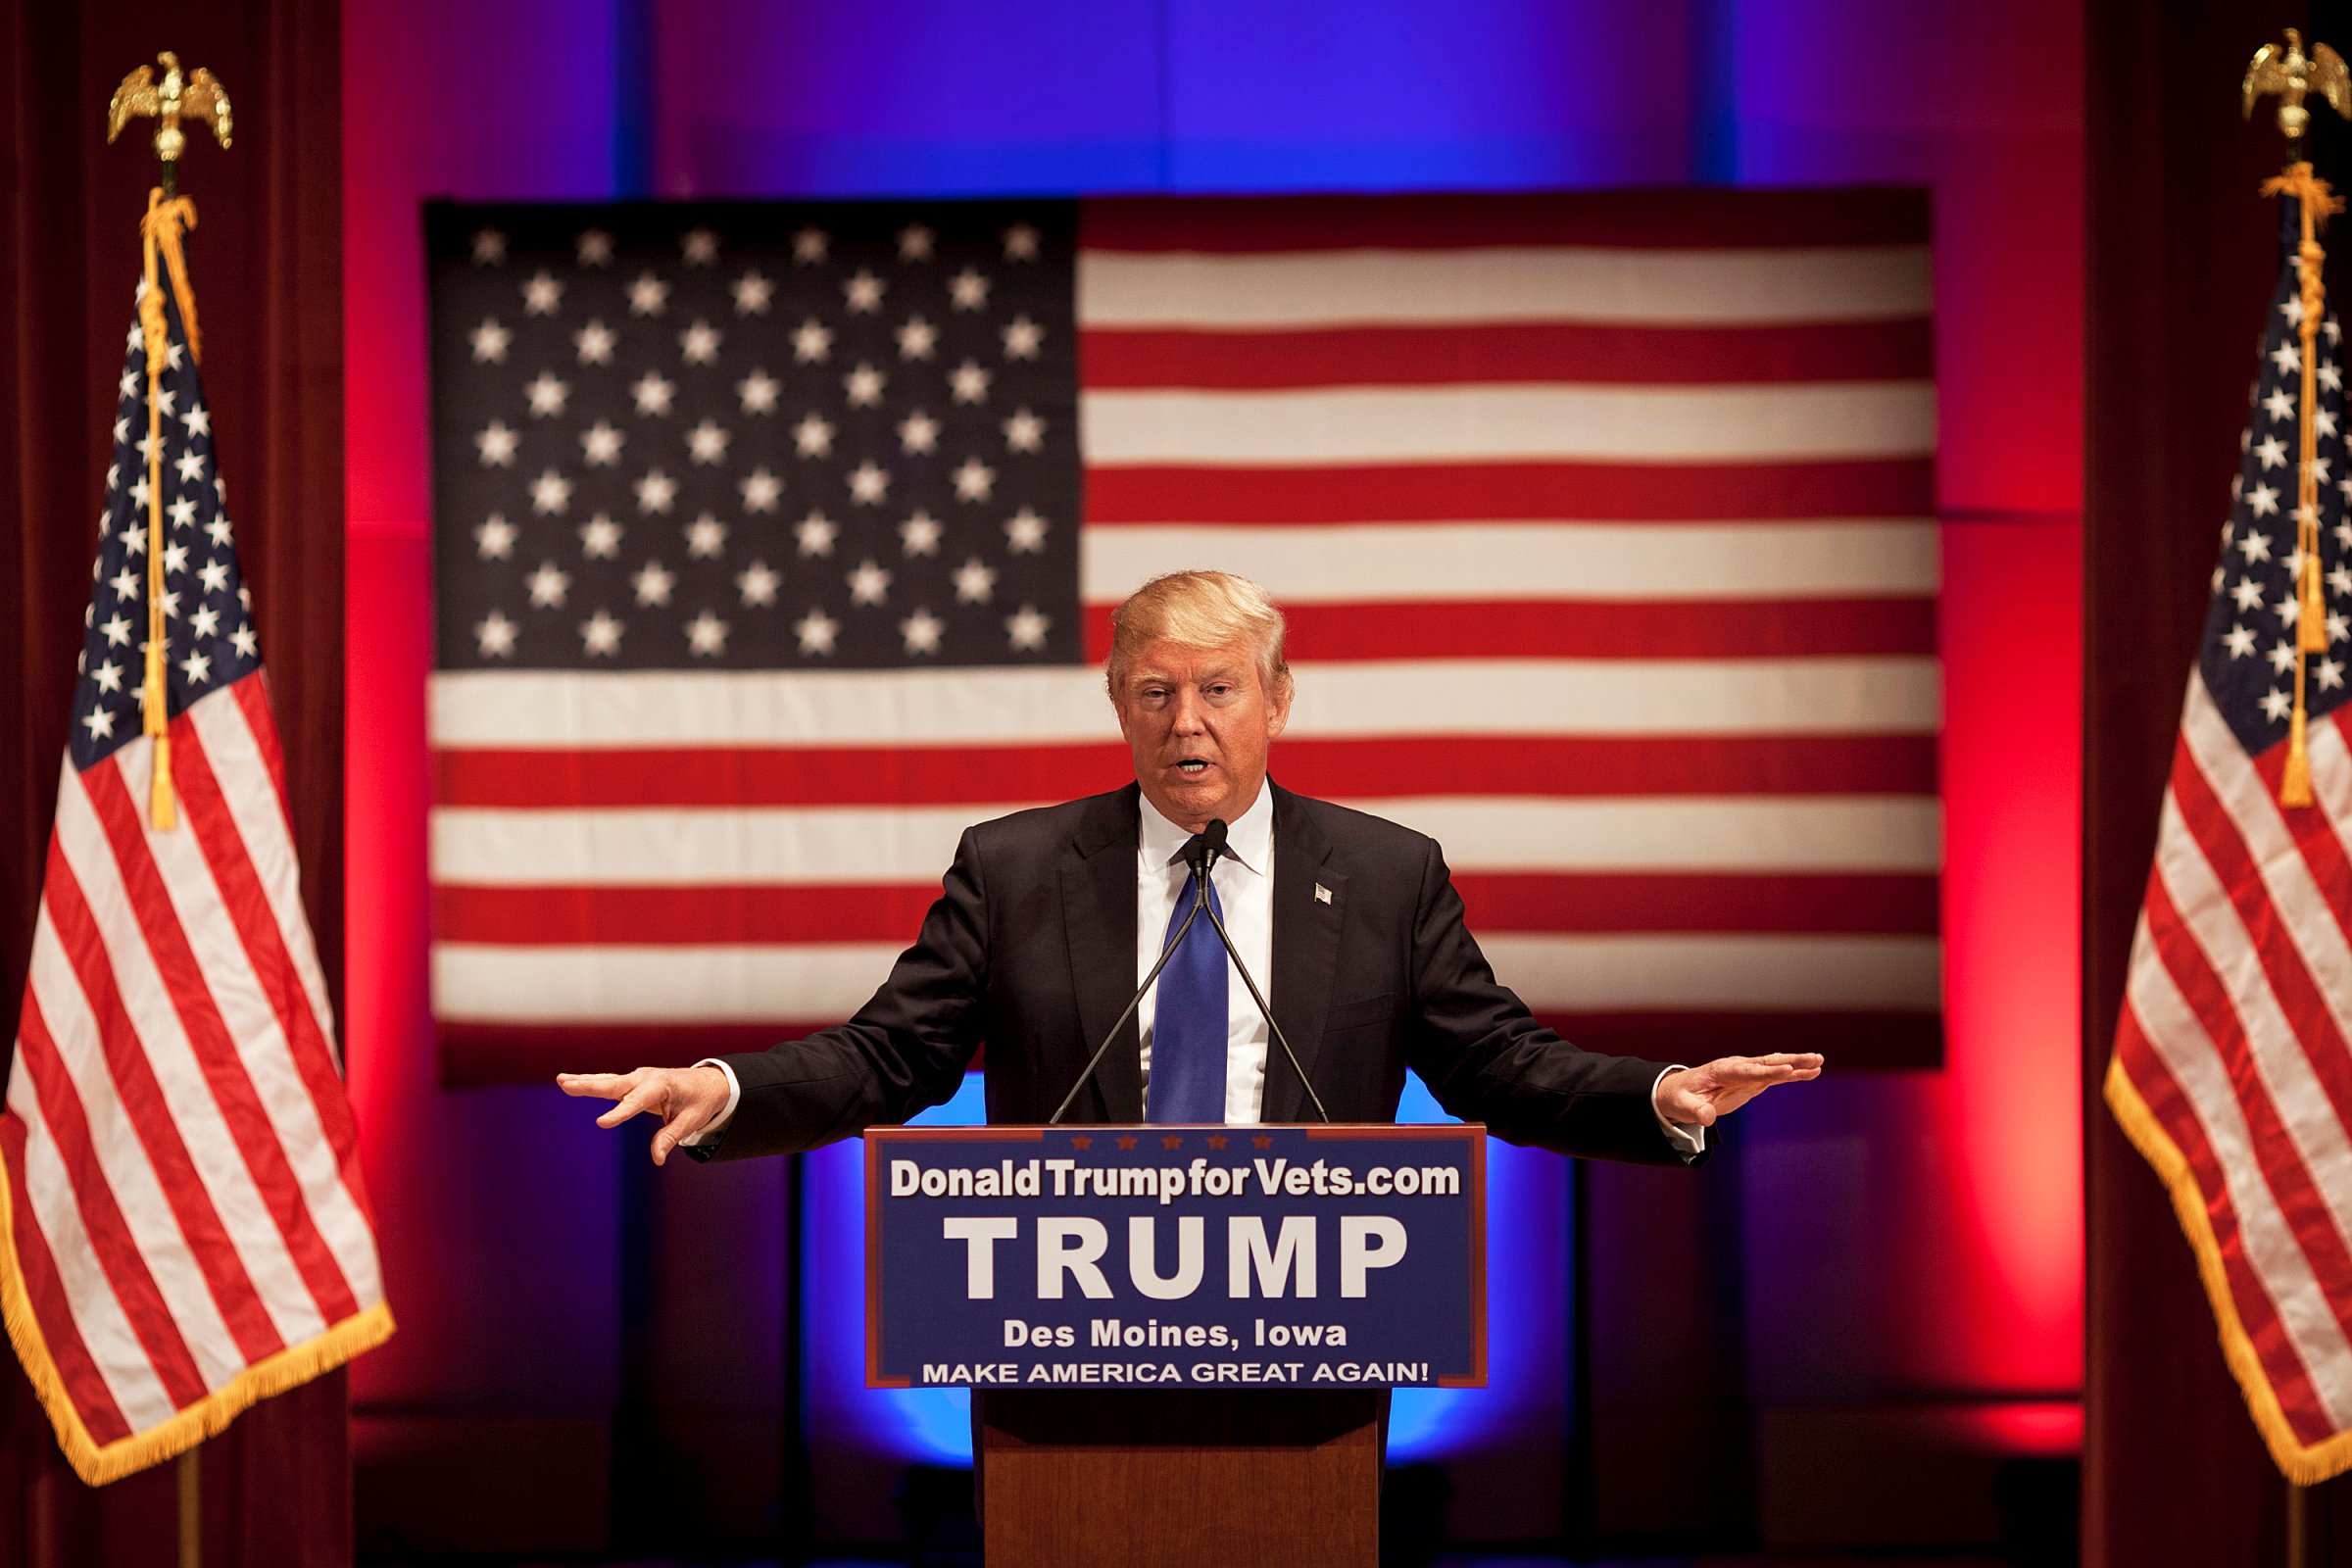 Donald Trump speaks at a rally for veterans in Des Moines, Iowa on Jan. 28, 2016.